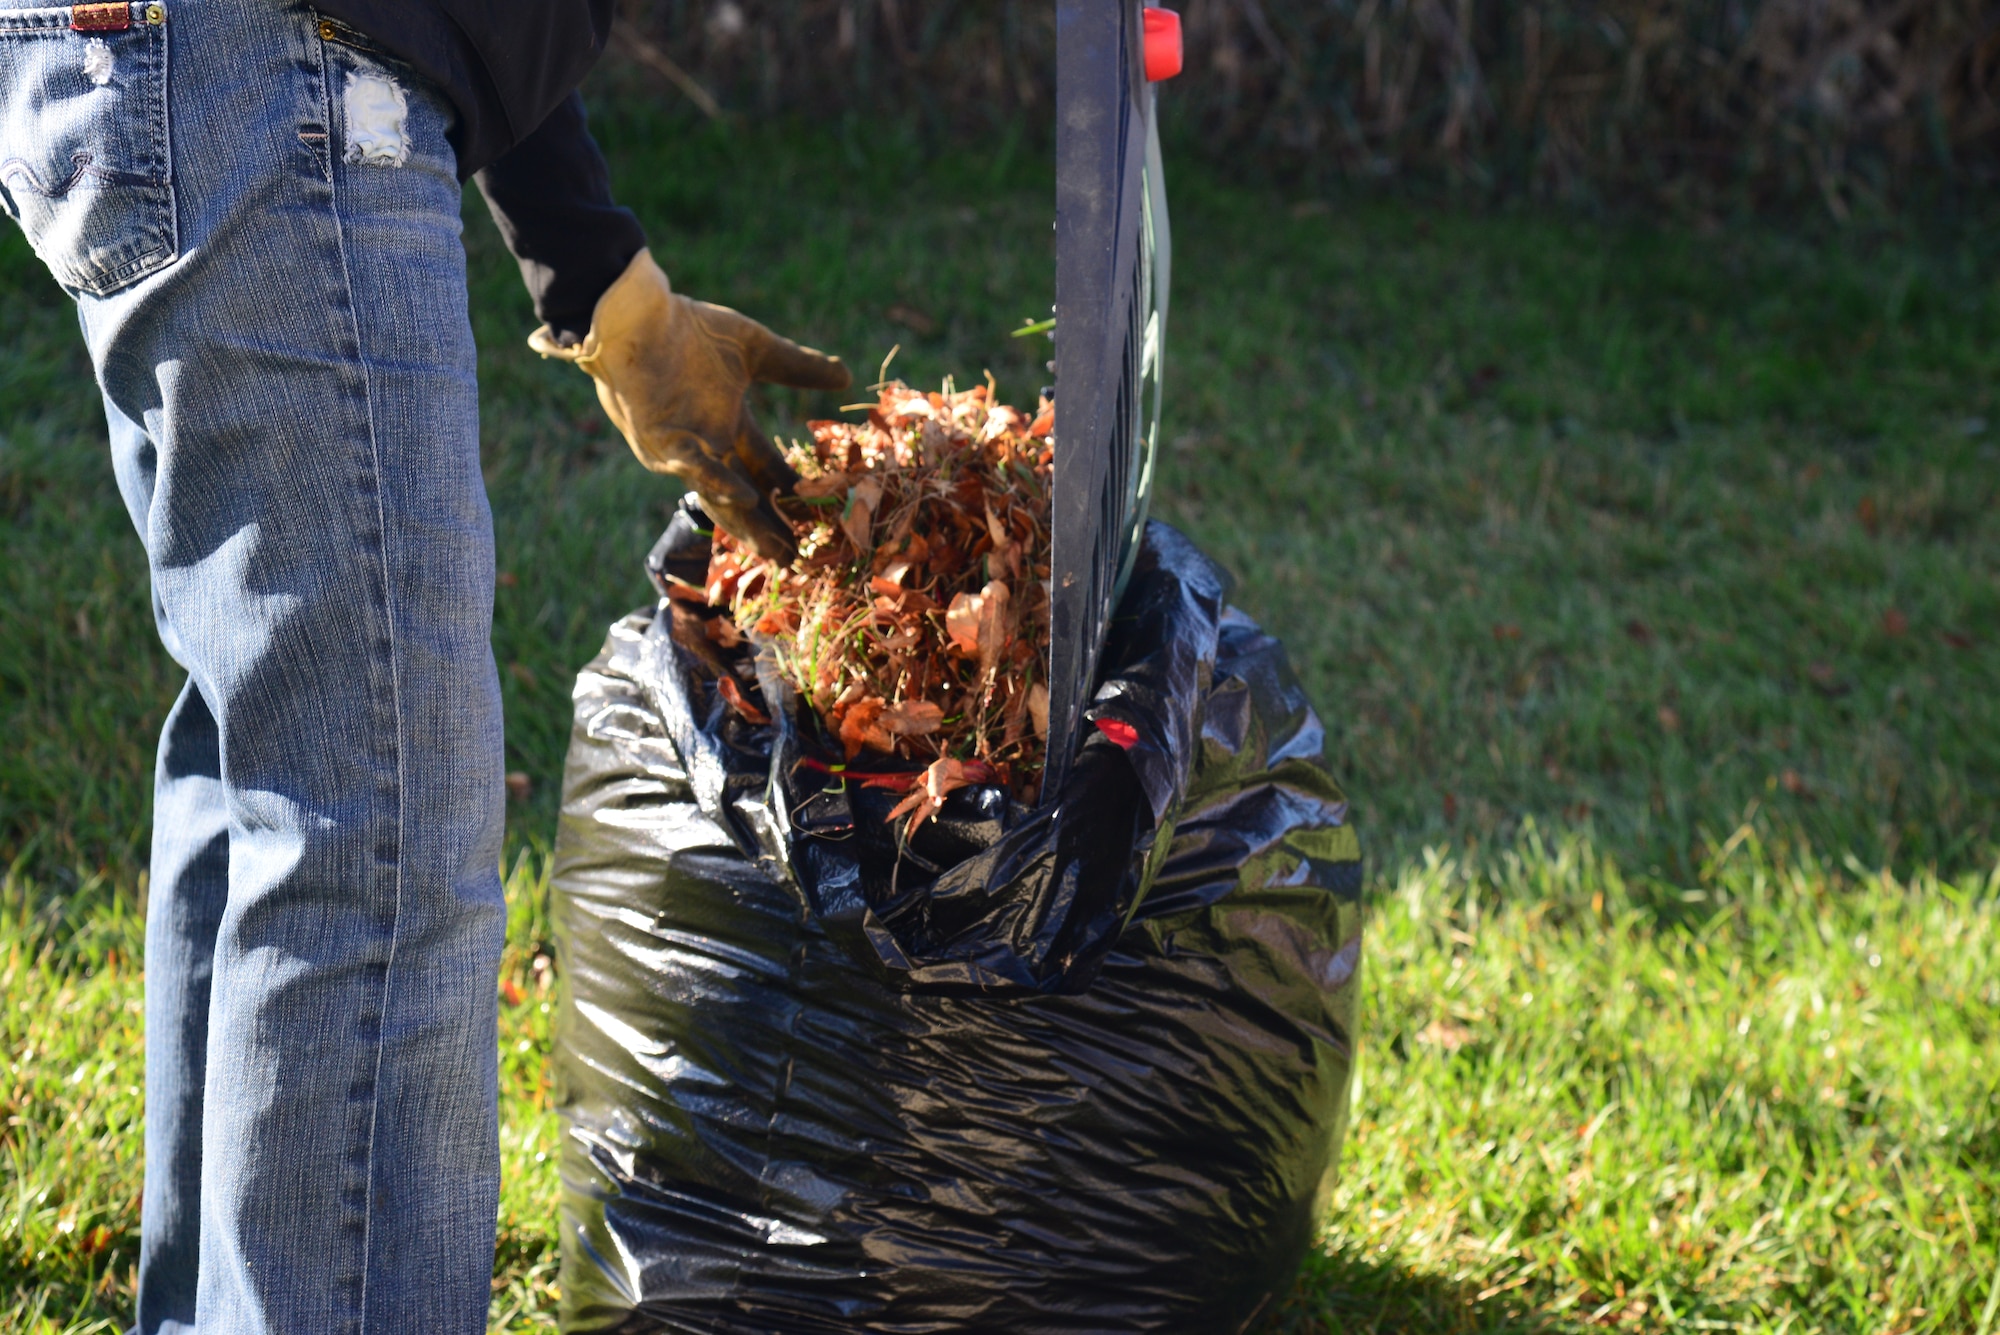 Airmen from Malmstrom Air Force Base and federal employees gathered for the Day of Caring, Oct. 23, 2015, in the Great Falls, Mont., community. The Day of Caring is an annual volunteer opportunity for individuals to help local community members with household chores, such as raking leaves, washing windows, trimming trees and changing lightbulbs. (U.S. Air Force photo/Airman 1st Class Magen M. Reeves)